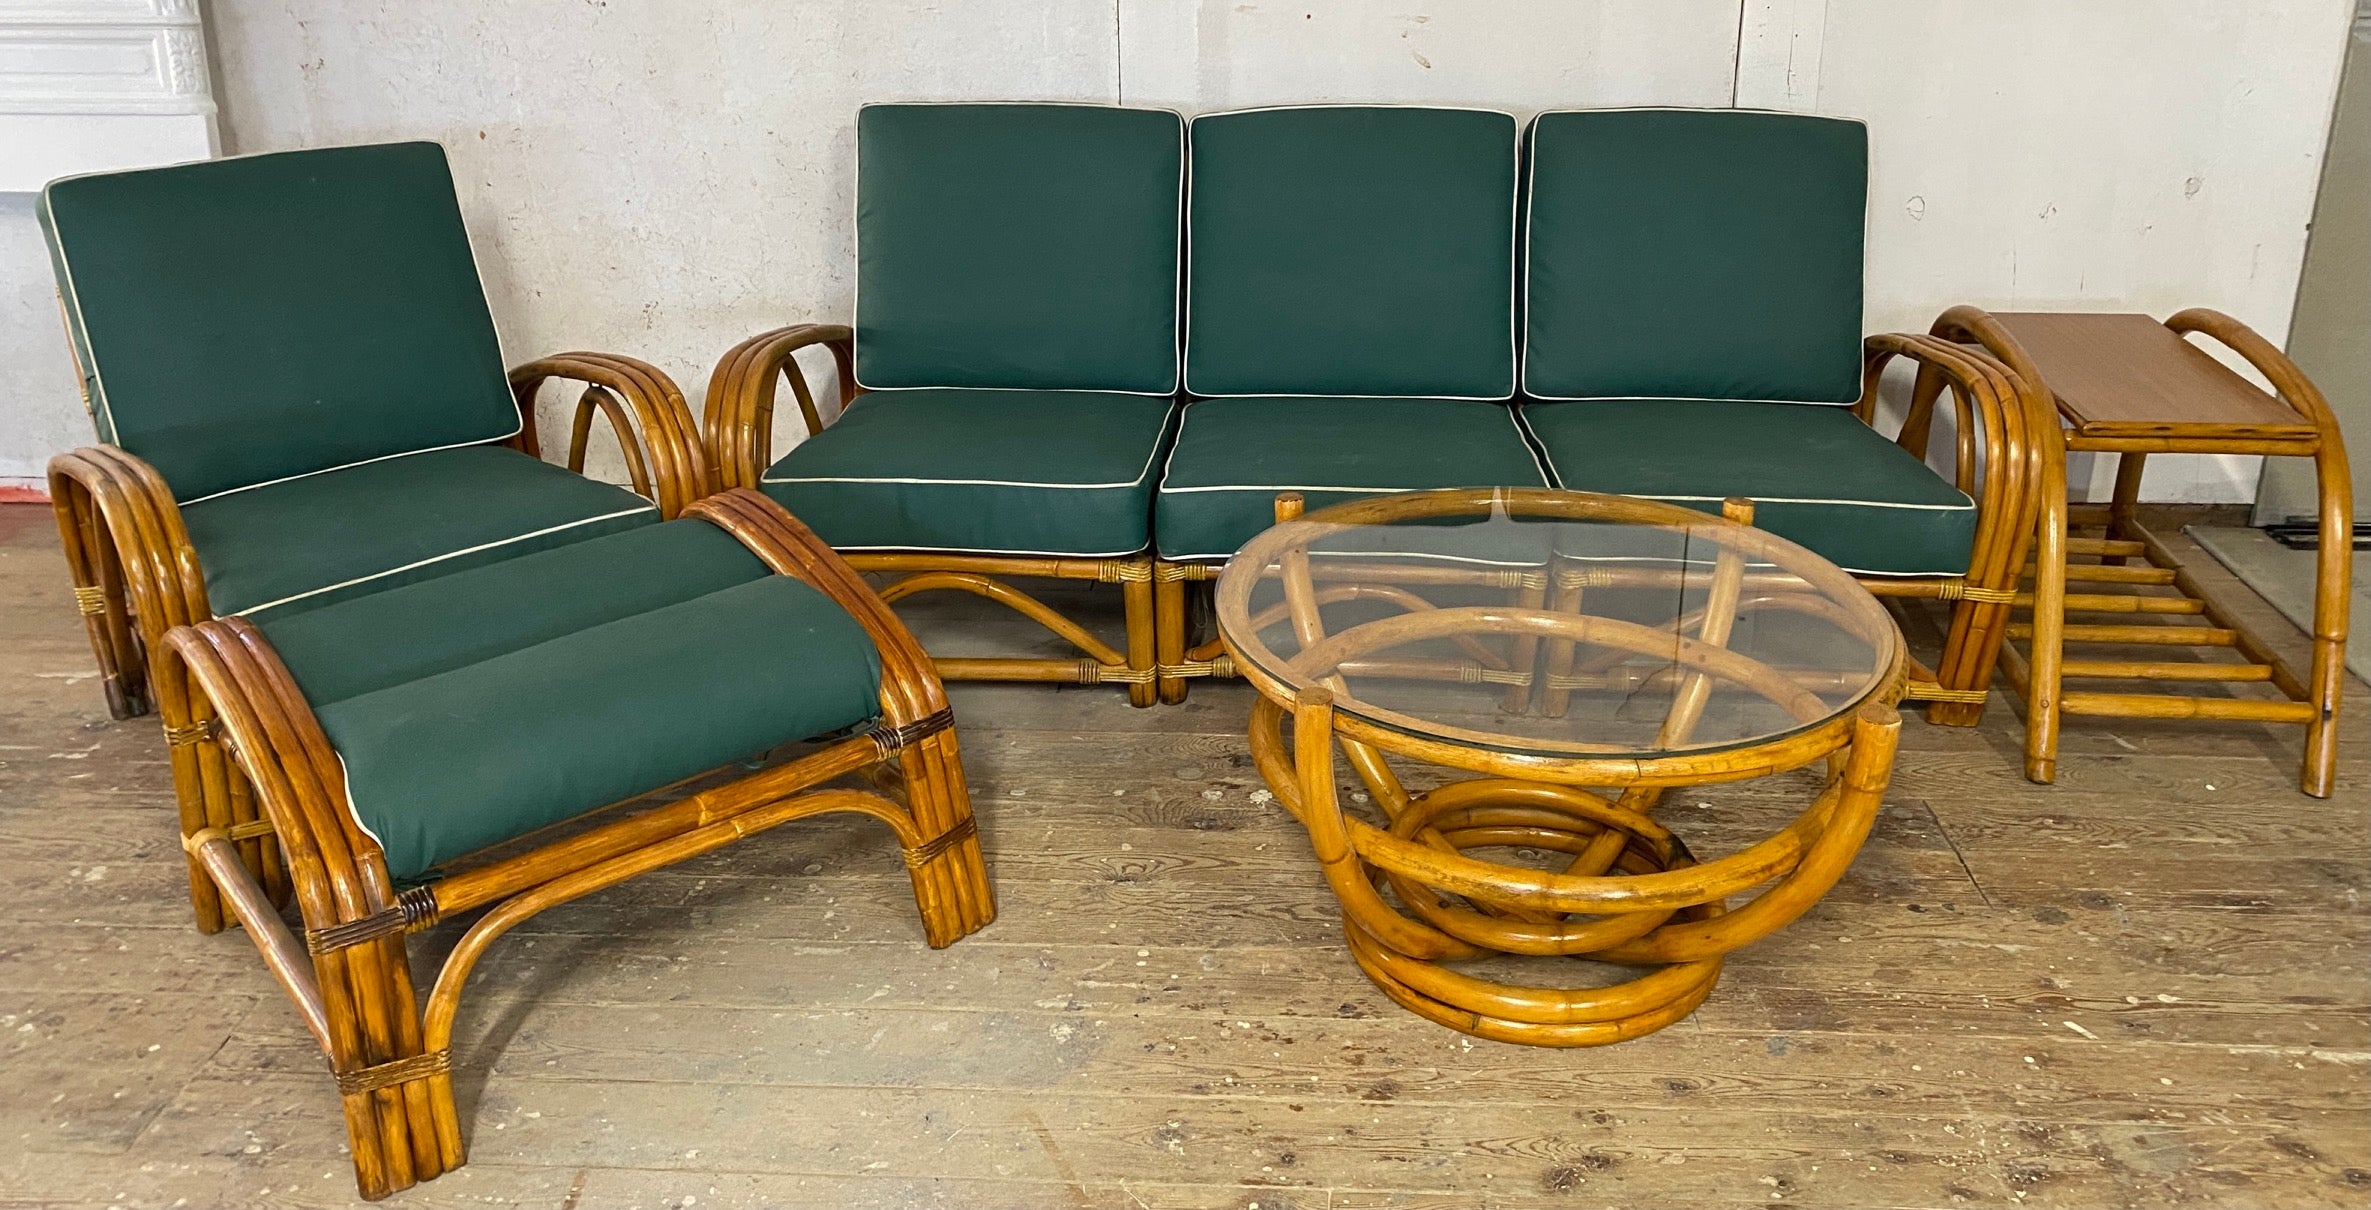 Restored 3 strand Paul Frankl style 6 piece rattan living room seating set consisting of 3 separated seat sofa, arm club chair with matching ottoman, side table, 2 tier corner table and round glass top coffee table. Cushions covered in vintage vinyl